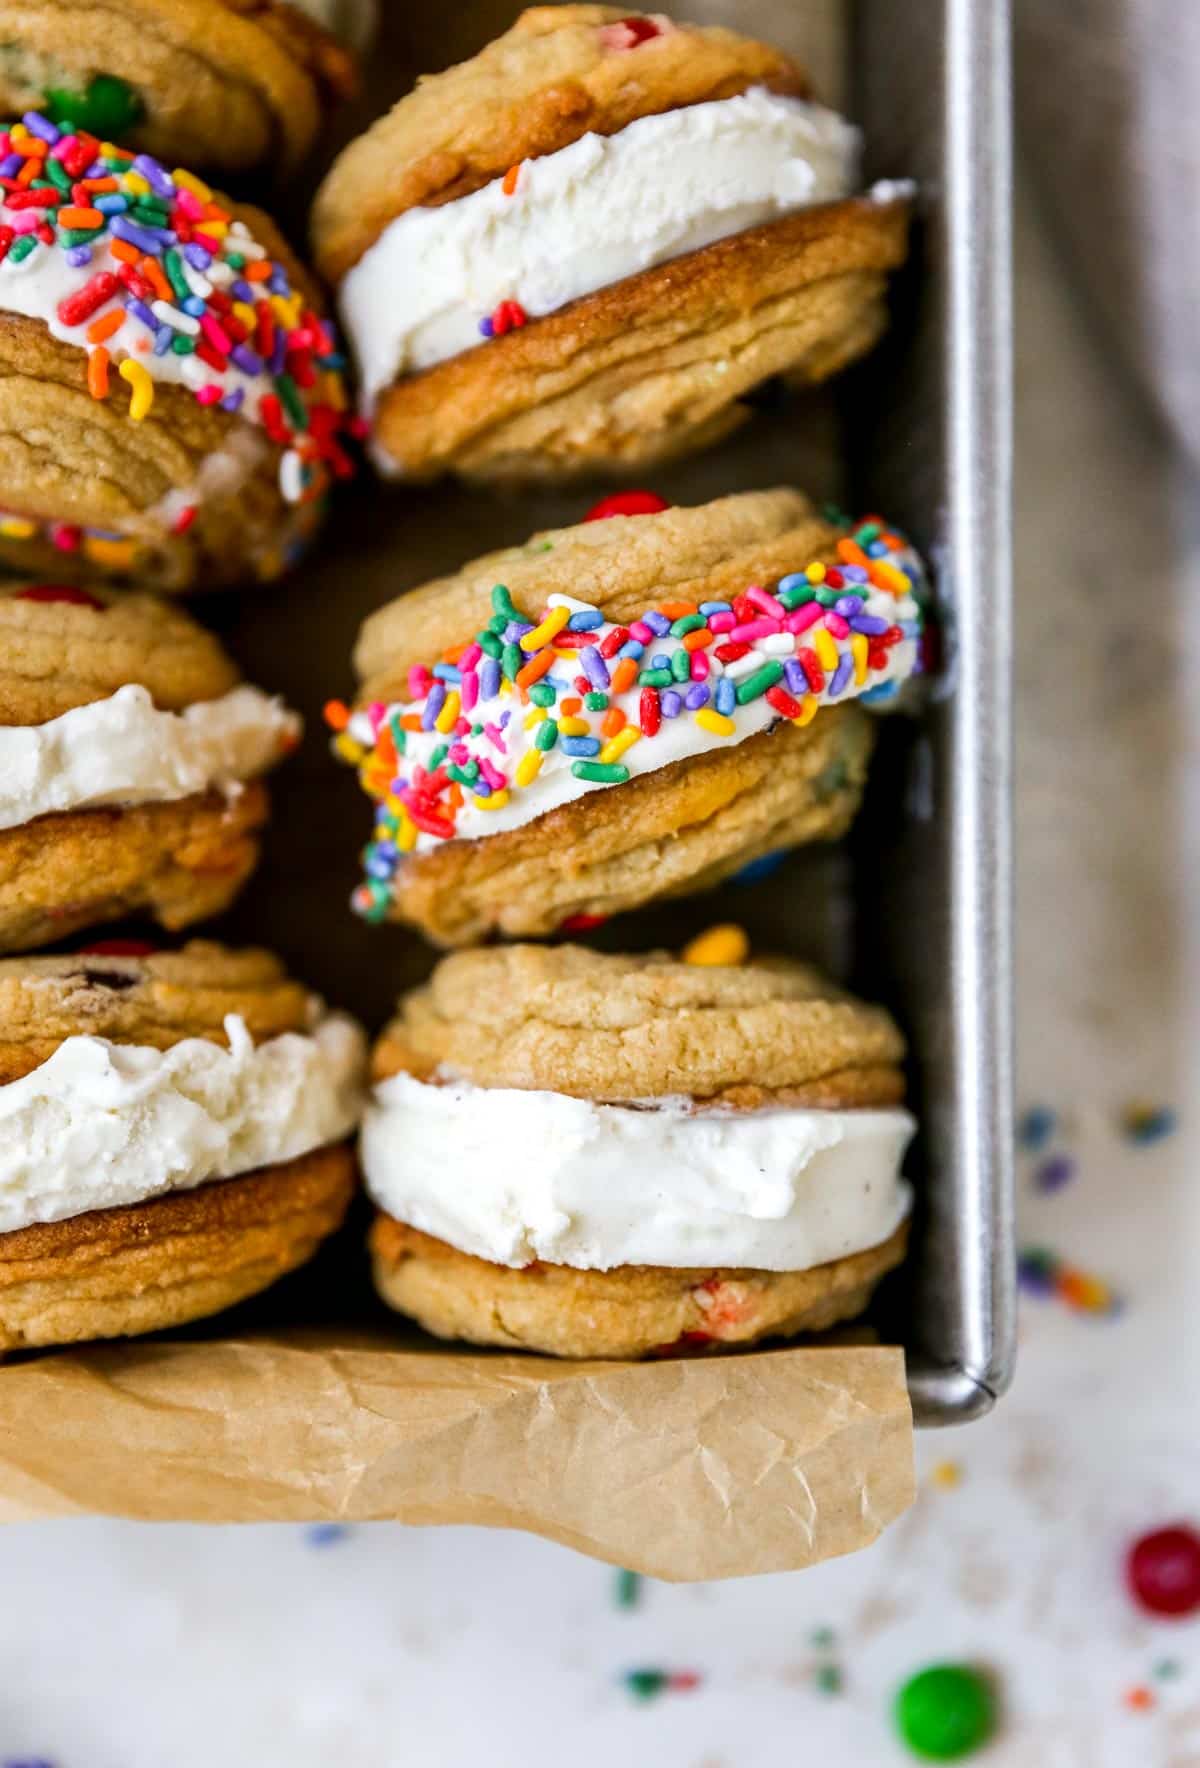 This Ice Cream Cookie Sandwich recipe is a summer favorite!